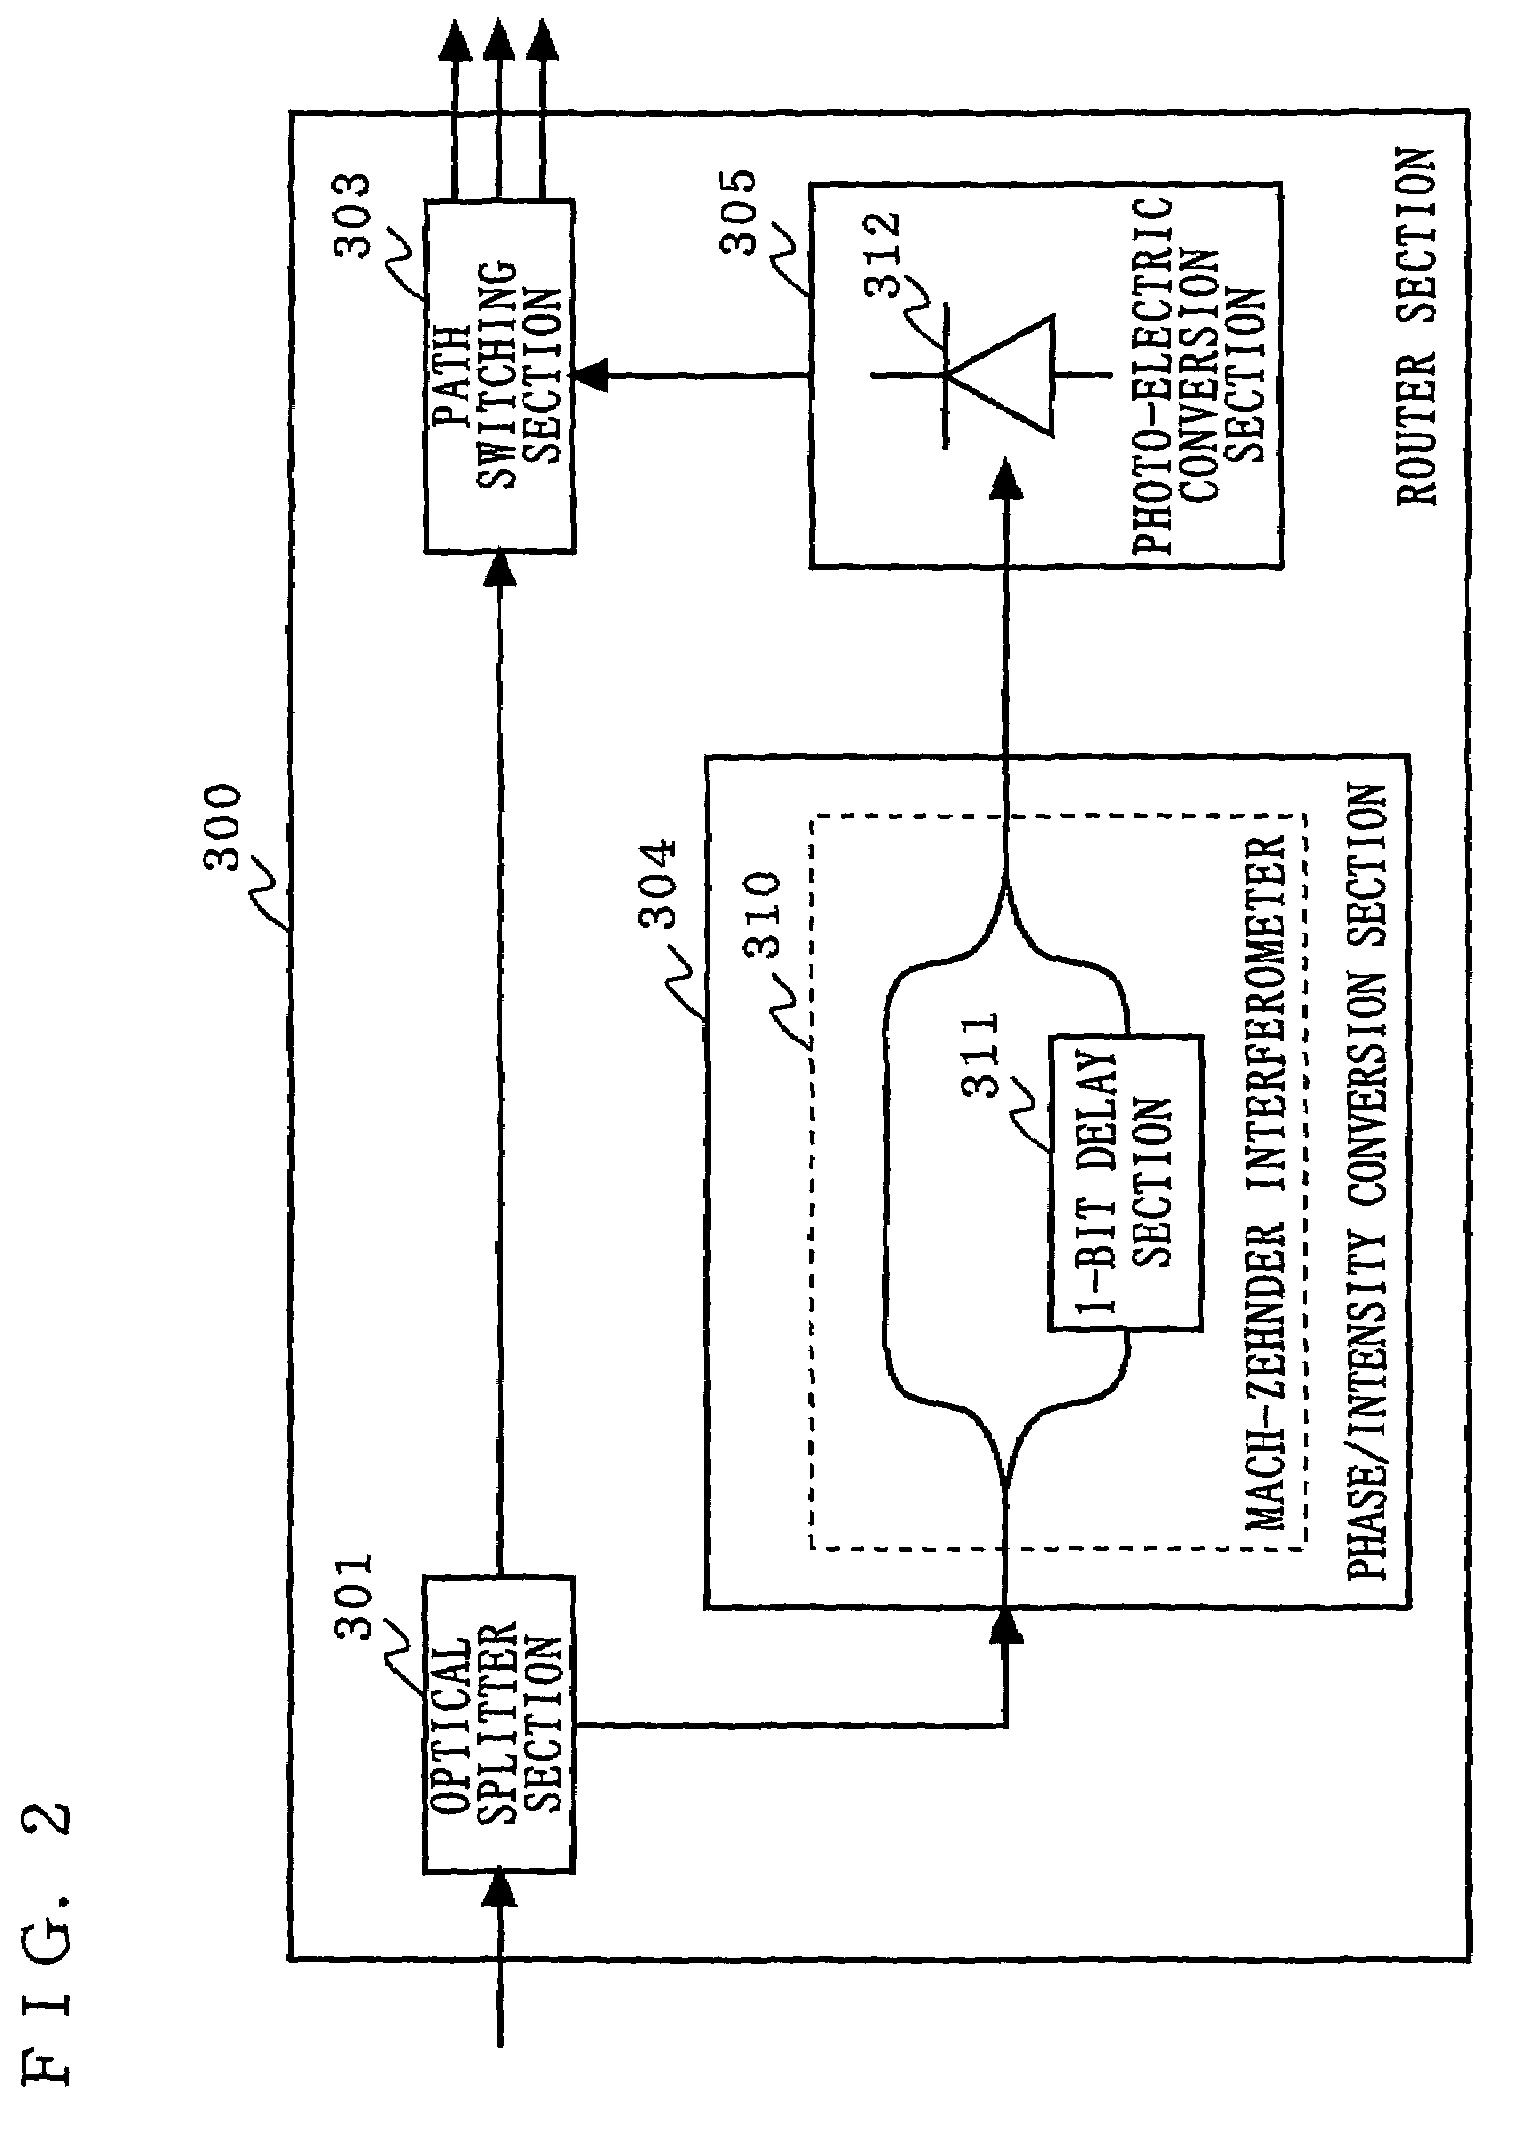 Optical packet exchanger